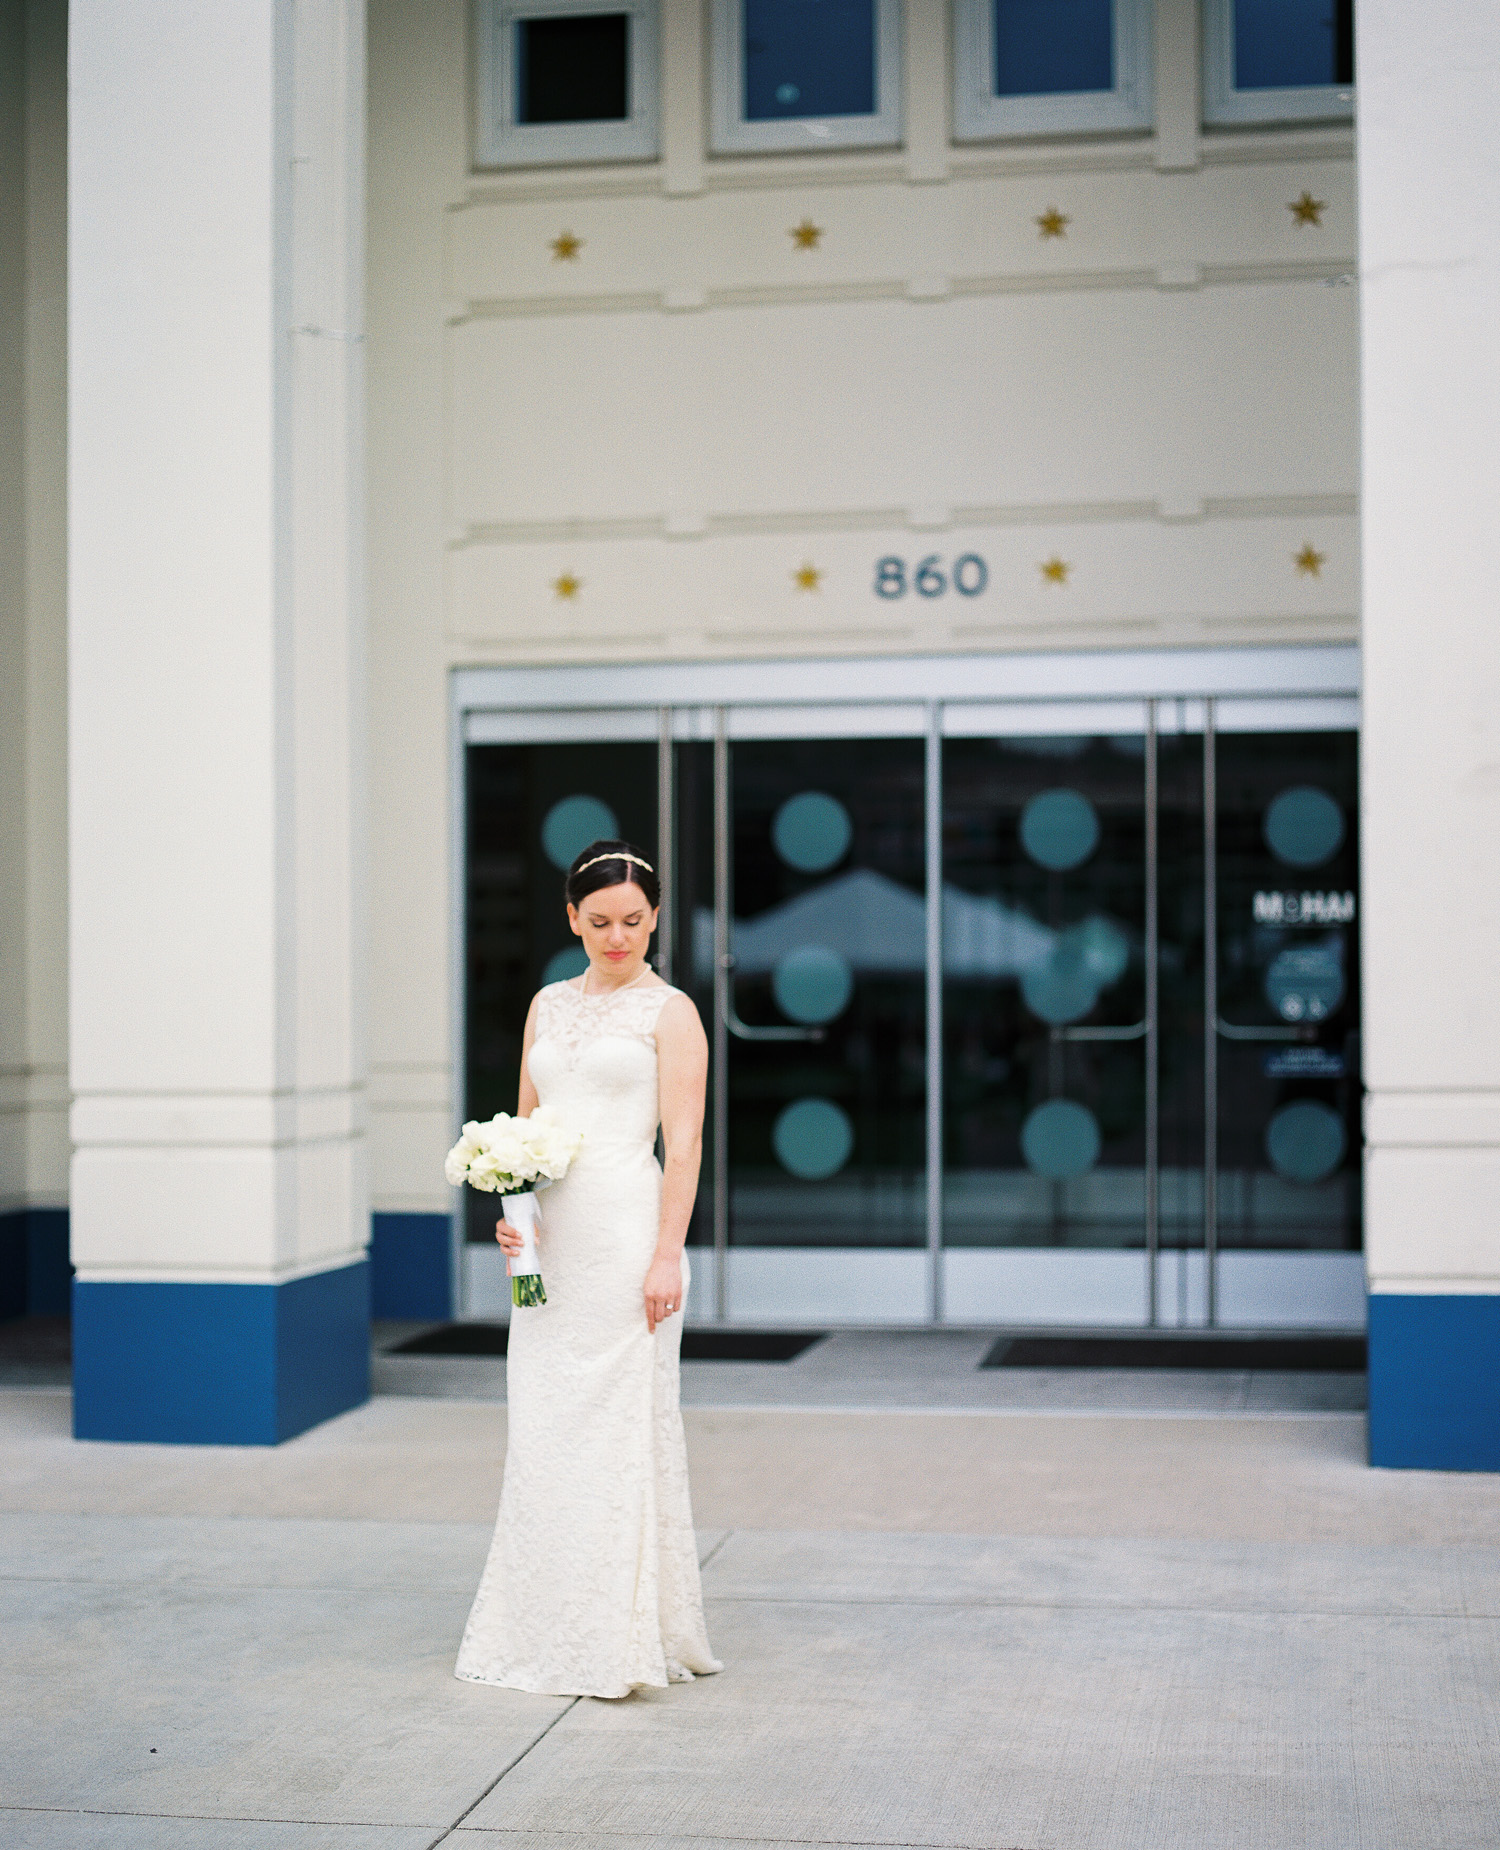 Seattle Museum of History and Industry Wedding Photography